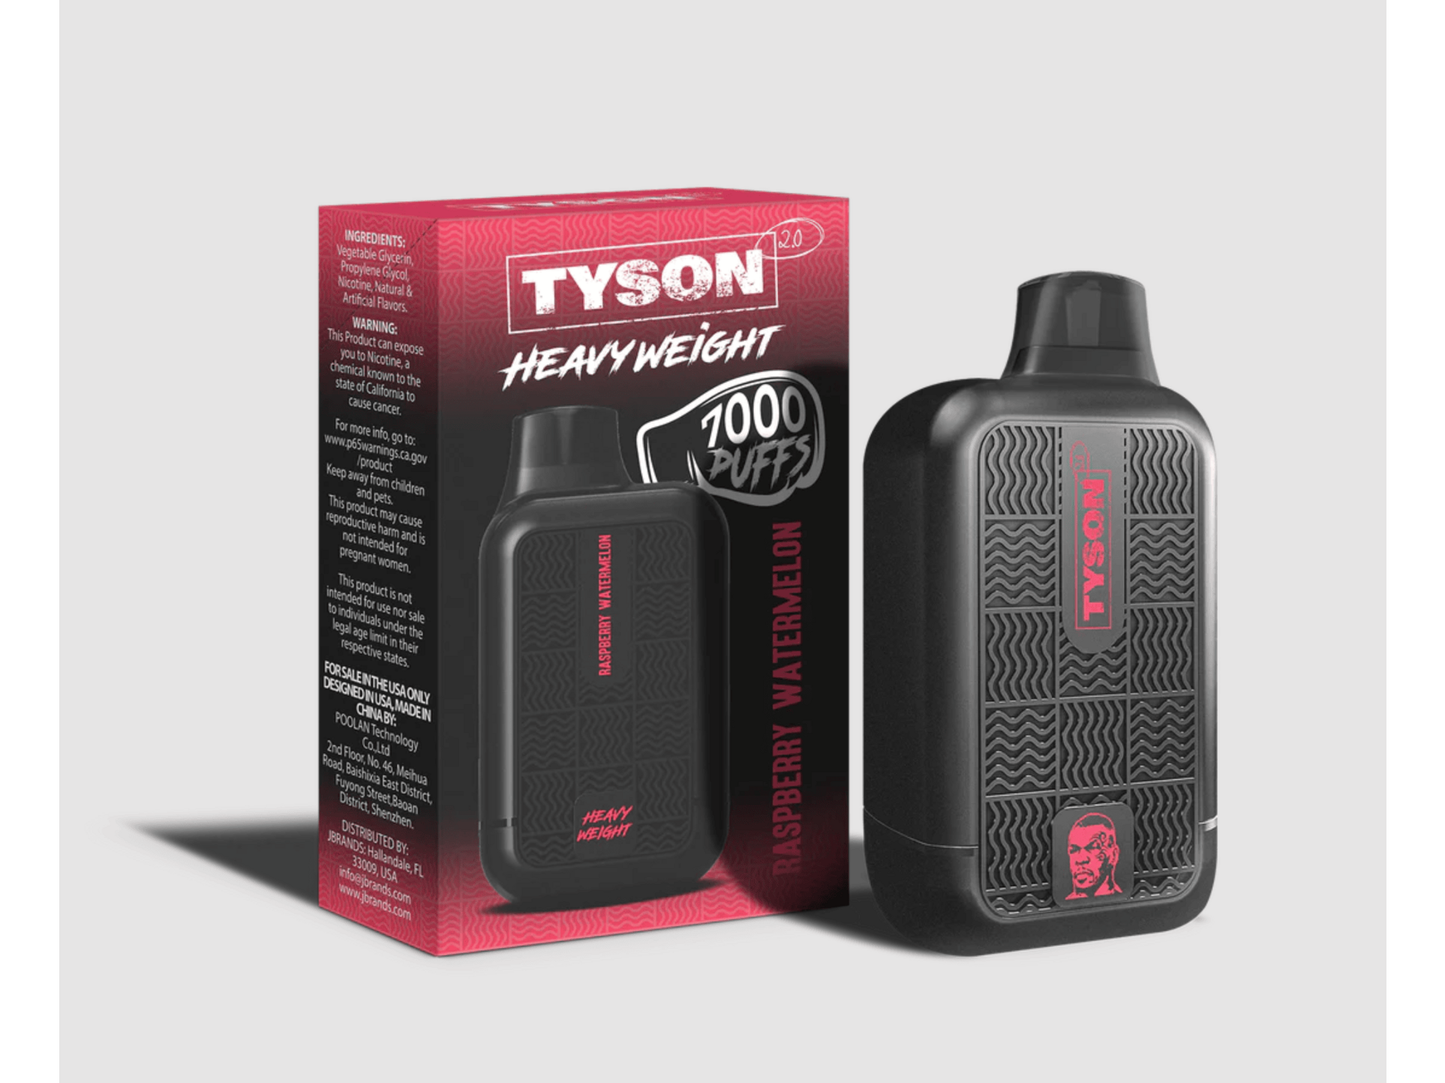 Tyson Heavyweight Raspberry Watermelon flavored disposable vape device and box.